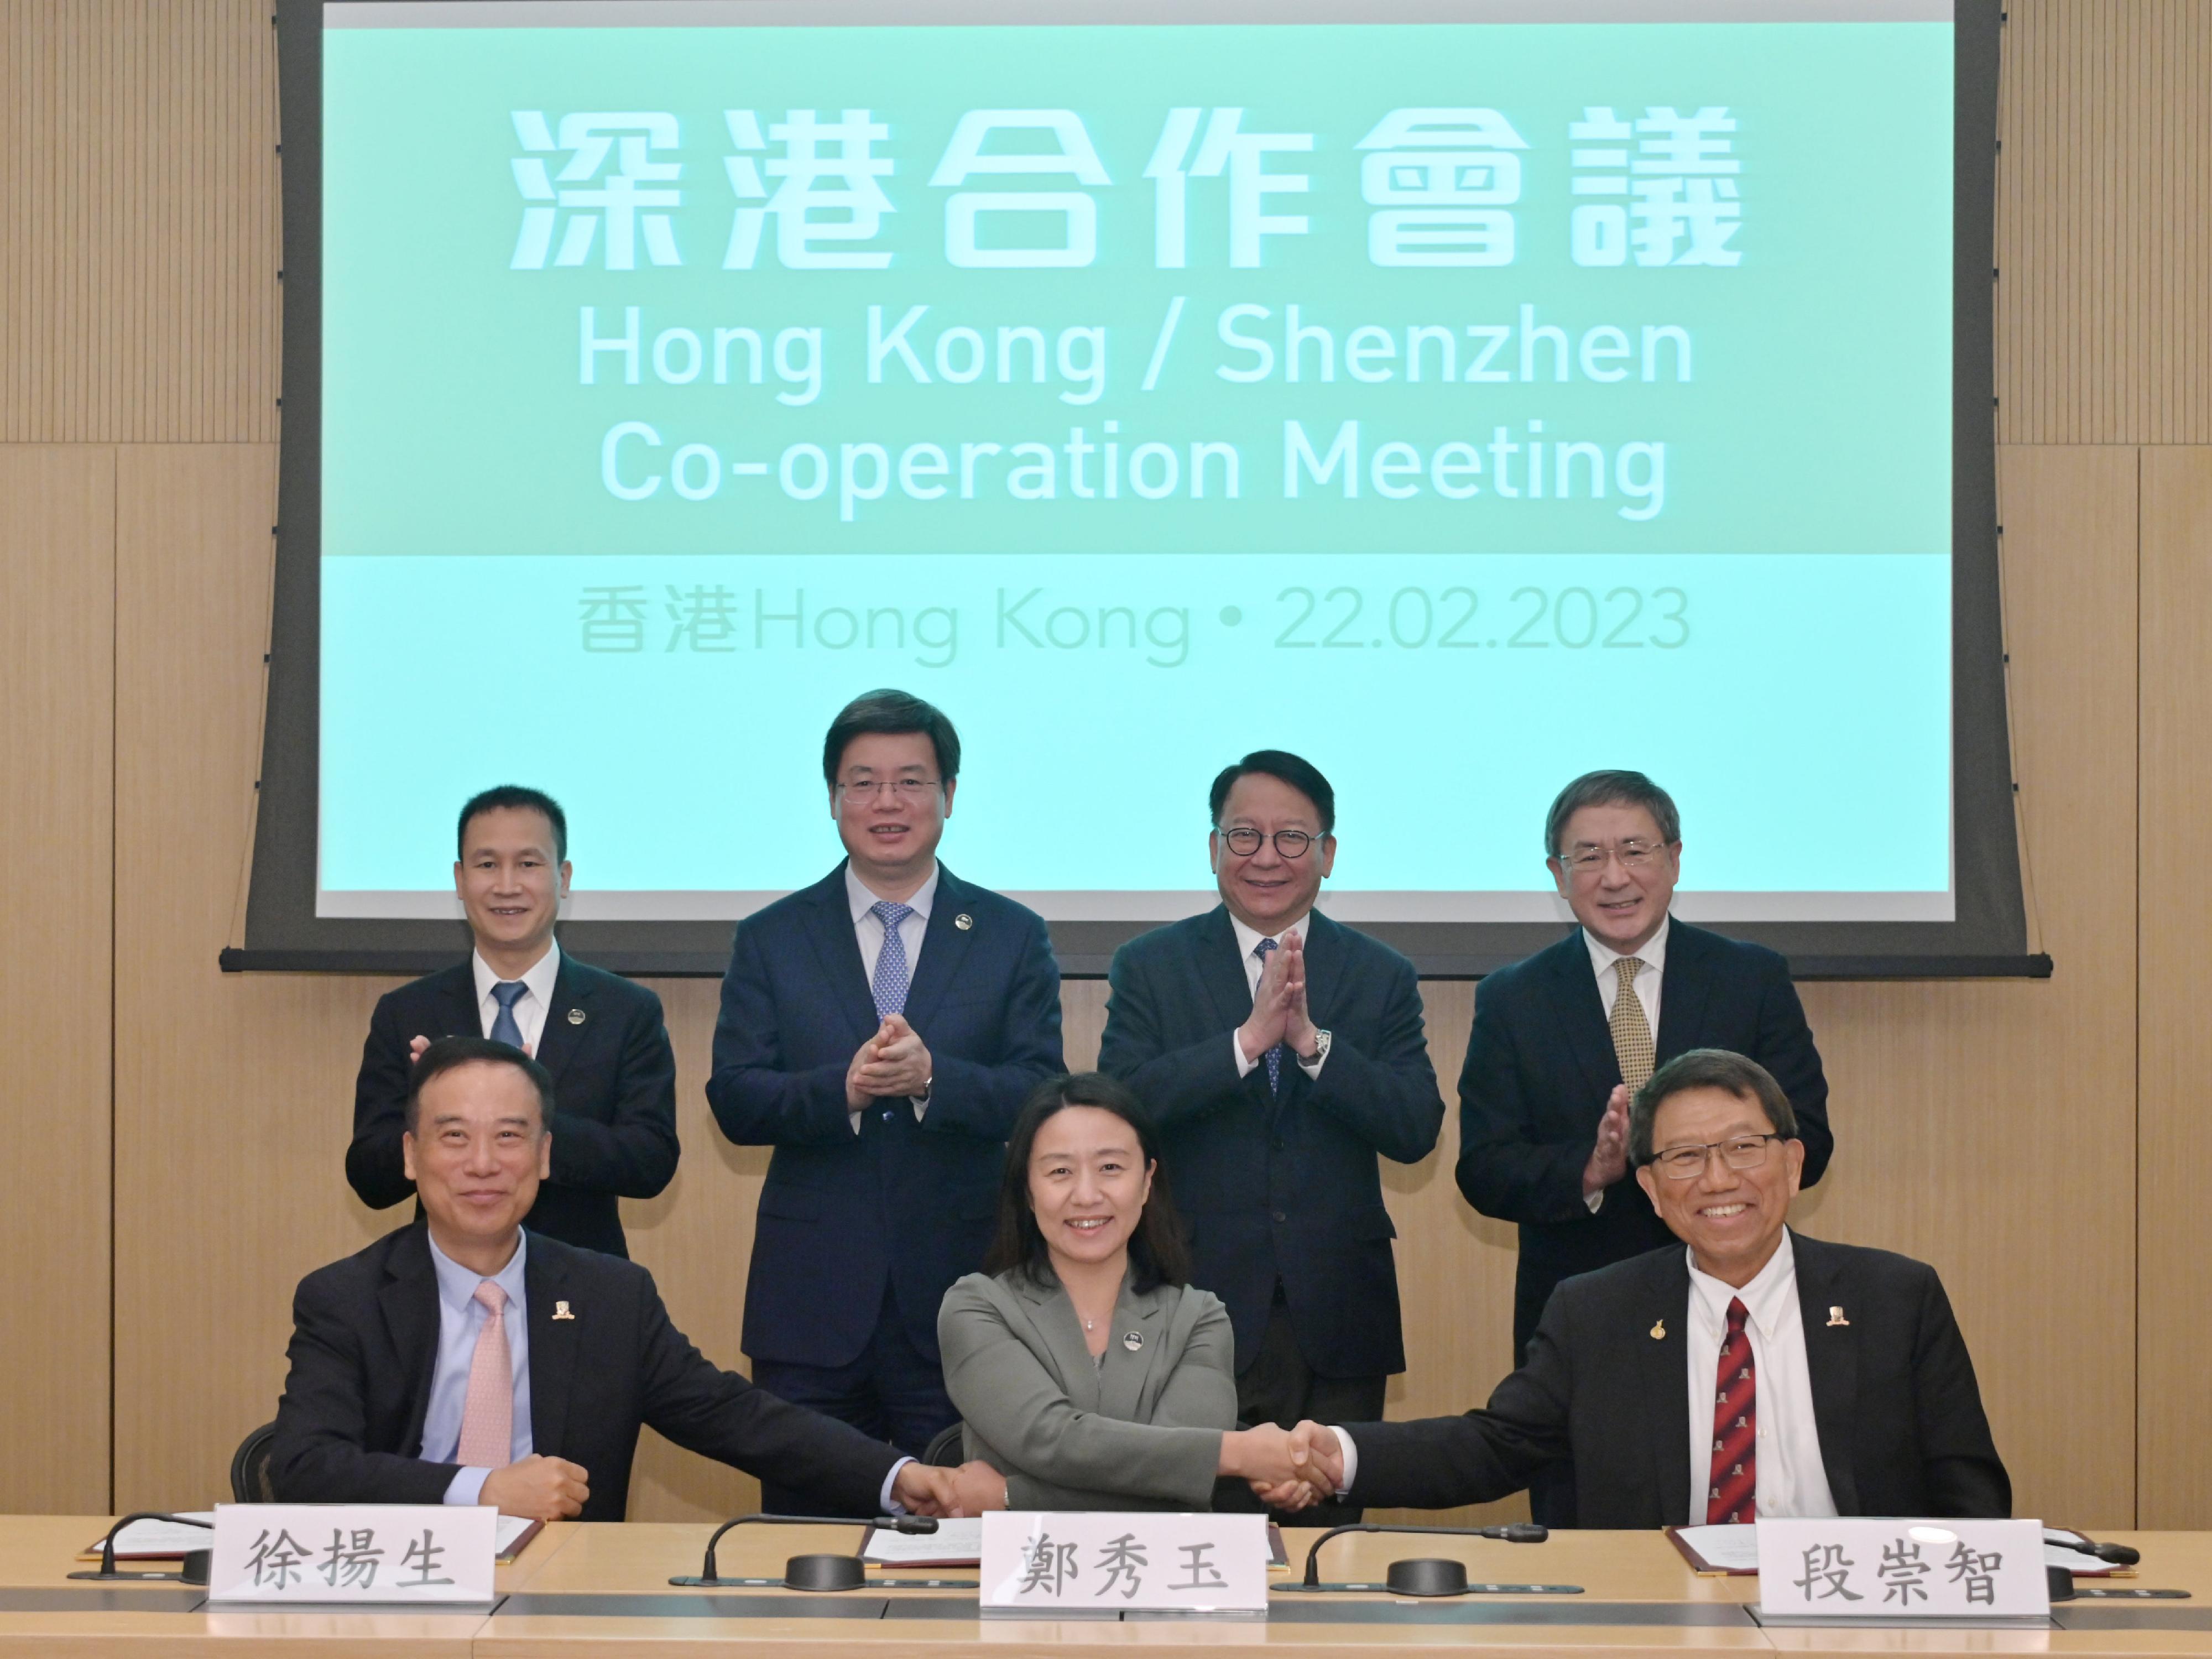 The Chief Secretary for Administration of the Government of the Hong Kong Special Administrative Region, Mr Chan Kwok-ki, and the Mayor of the Shenzhen Municipal Government, Mr Qin Weizhong, co-chaired the 2023 Hong Kong/Shenzhen Co-operation Meeting in Hong Kong on February 22 and witnessed the signing of three co-operation documents between Hong Kong and Shenzhen. Photo shows Mr Chan (back row, second right) and Mr Qin (back row, second left) witnessing the signing of a supplementary agreement to further deepen co-operation among the Shenzhen Municipal Government, the Chinese University of Hong Kong and the Chinese University of Hong Kong, Shenzhen.